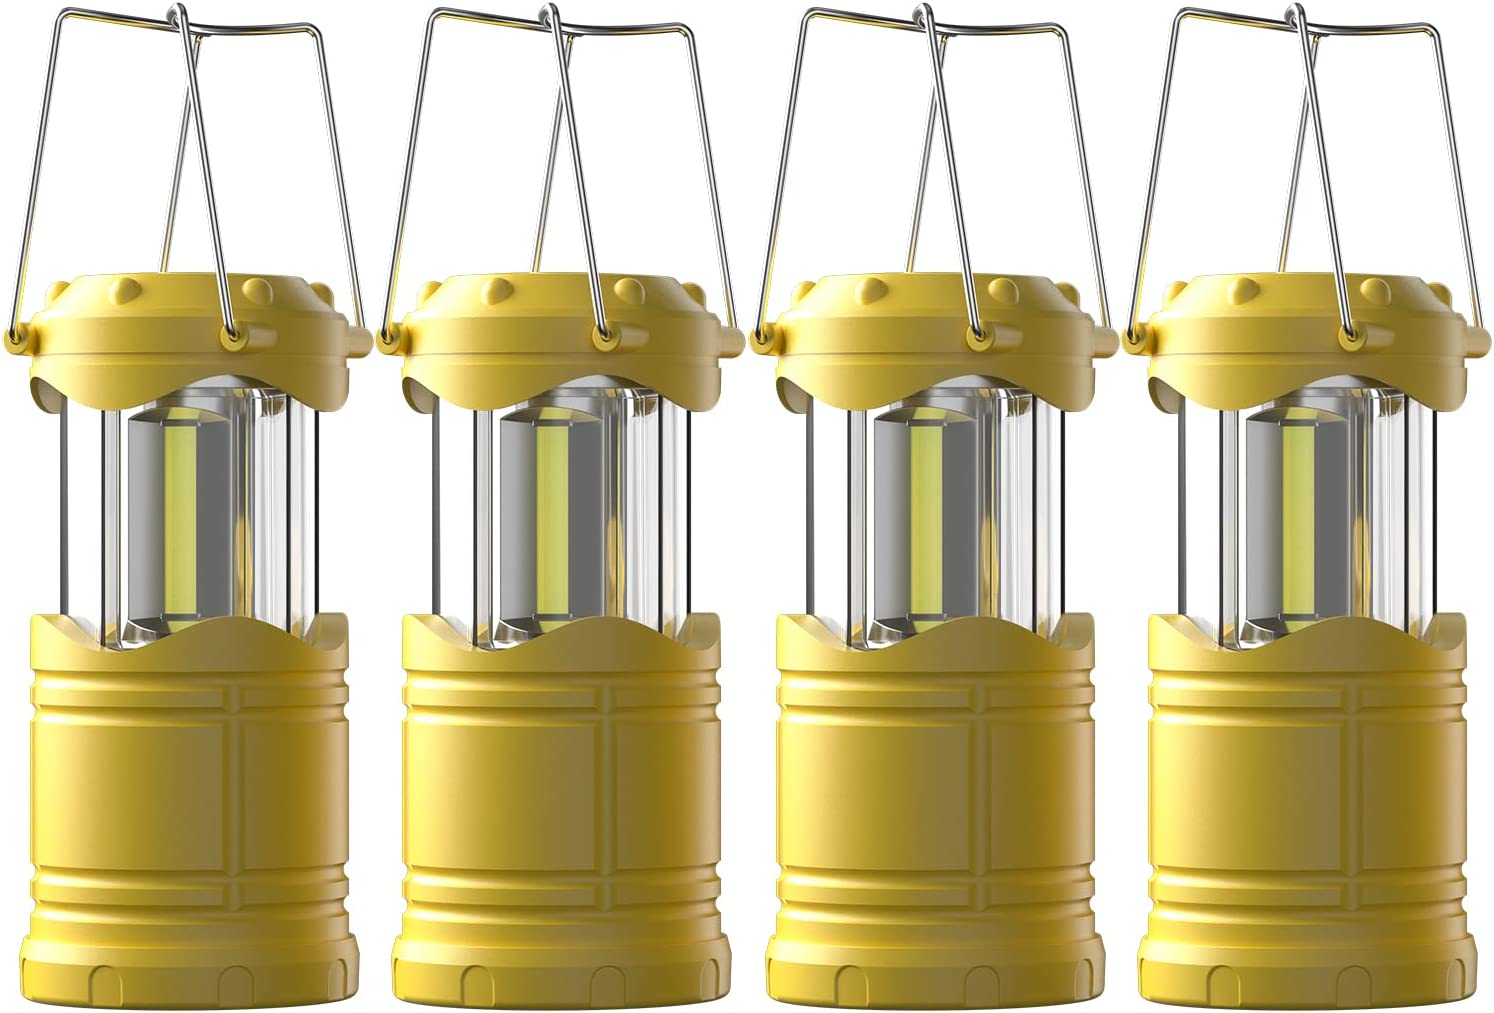 4 Pack COB Camping Lantern, Portable High Lumen Outdoor Camping Flashlight Torch Light, Bright Survival Equipment Gear Kit for Emergency, Hiking, Tent, Backpacking, Outages, Hurricanes (Yellow)